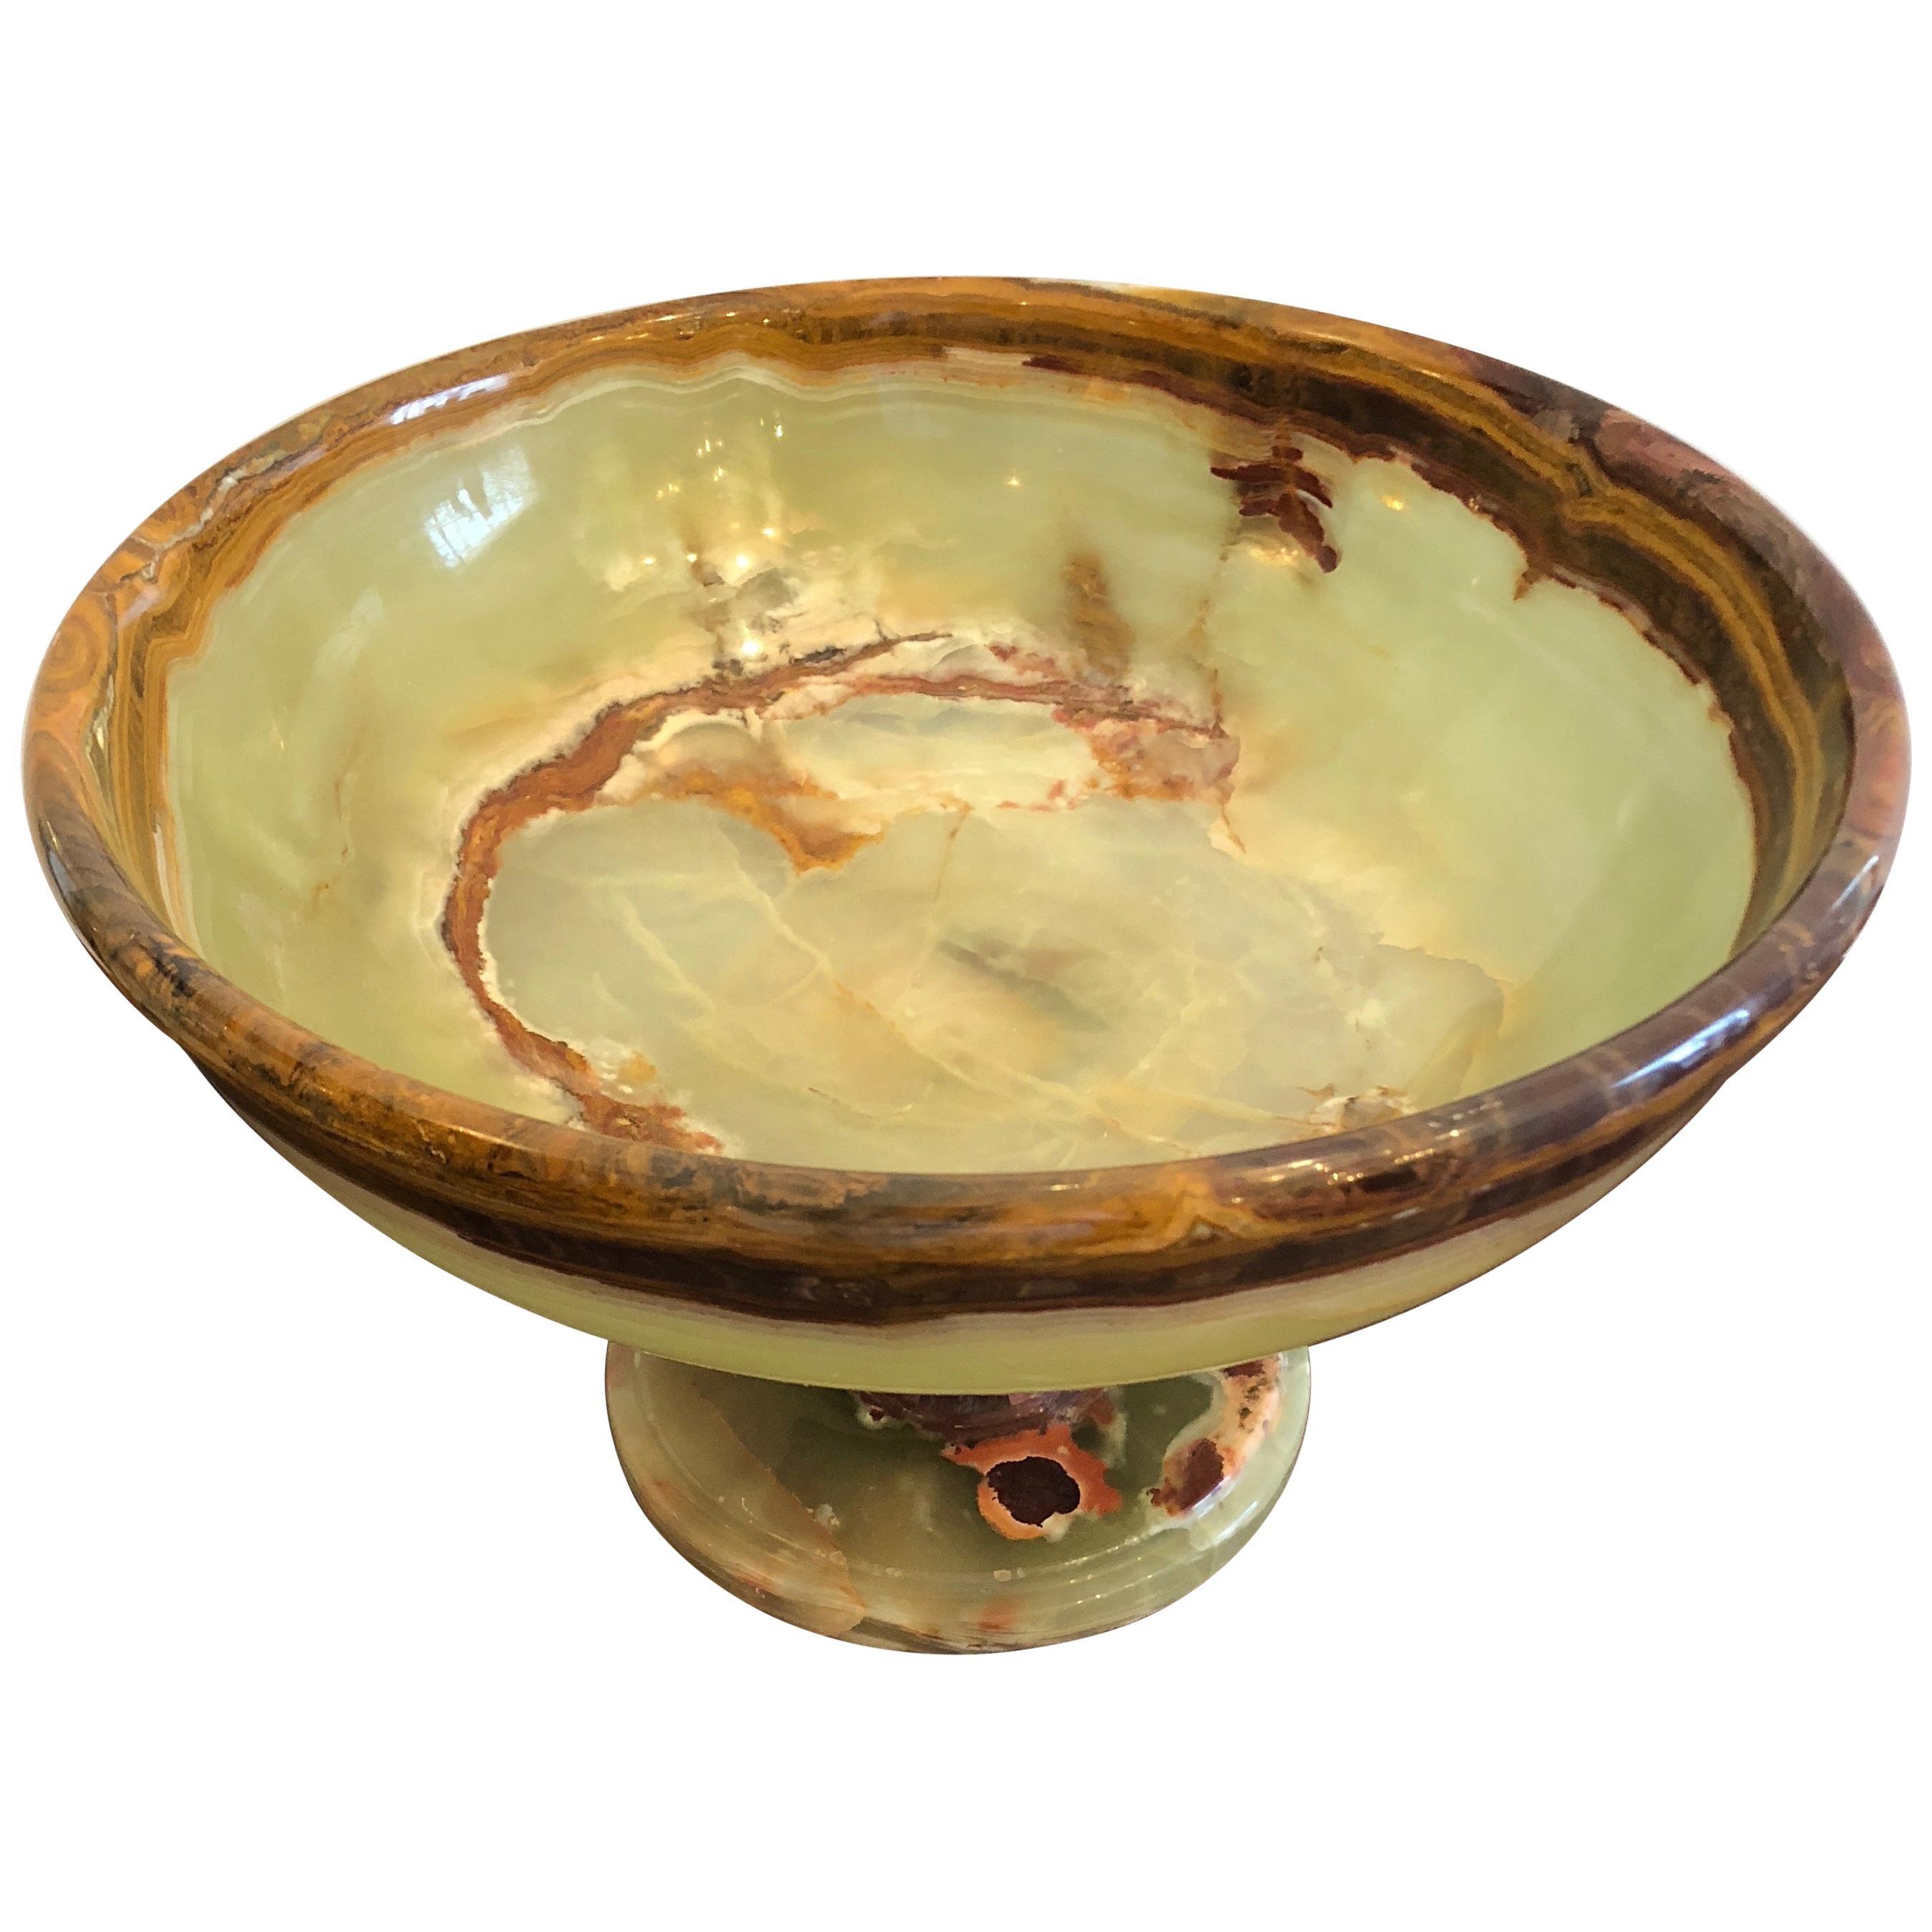 Luminous Large Onyx Marble Center Bowl Compote Tazza